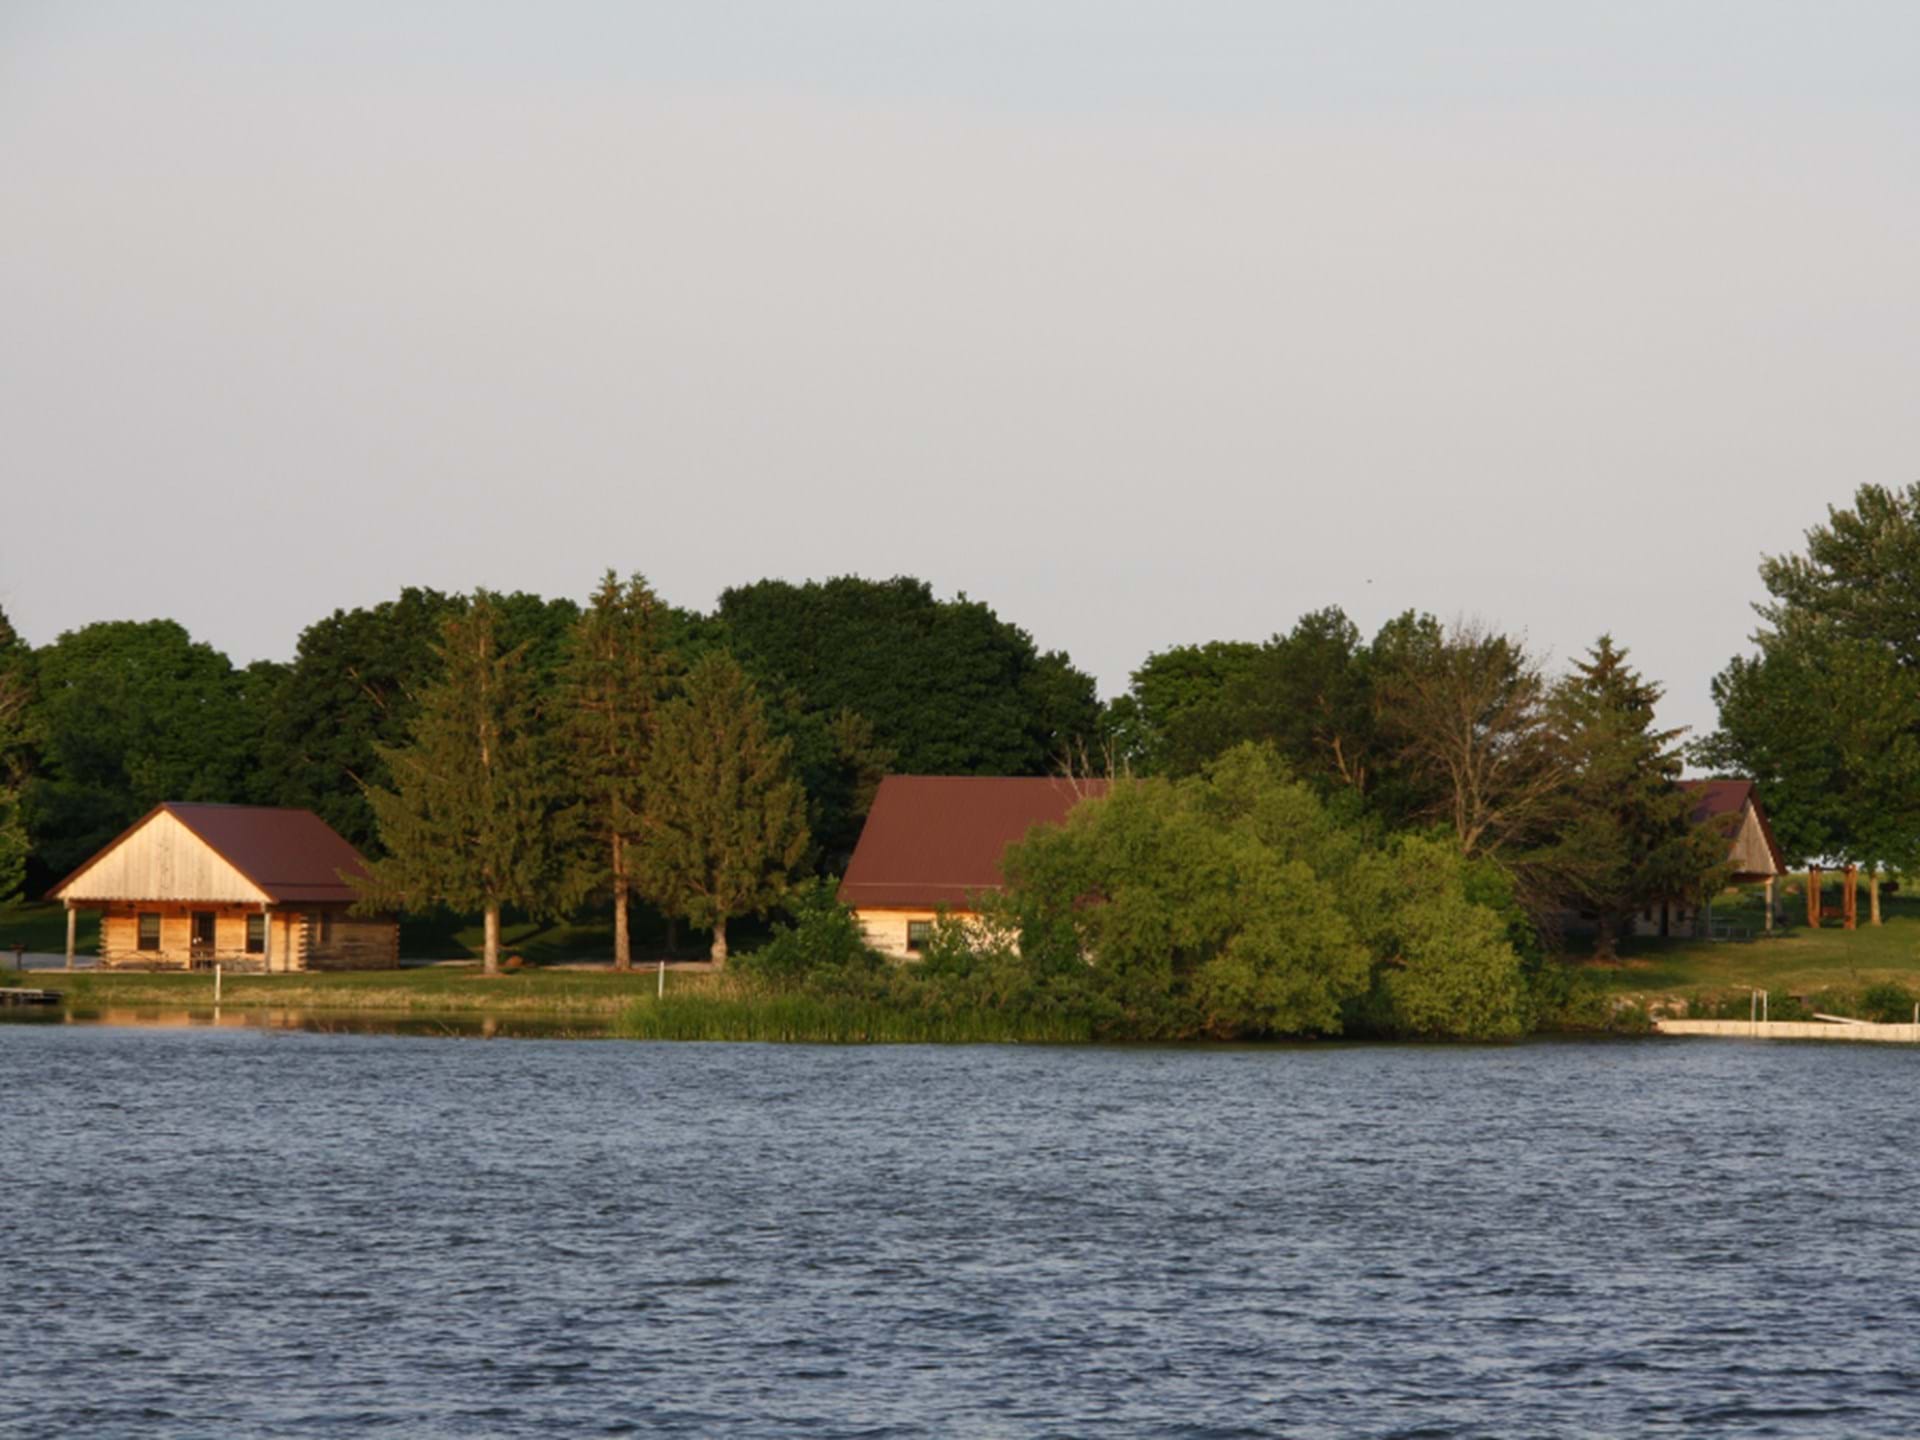 Cabins overlooking the lake